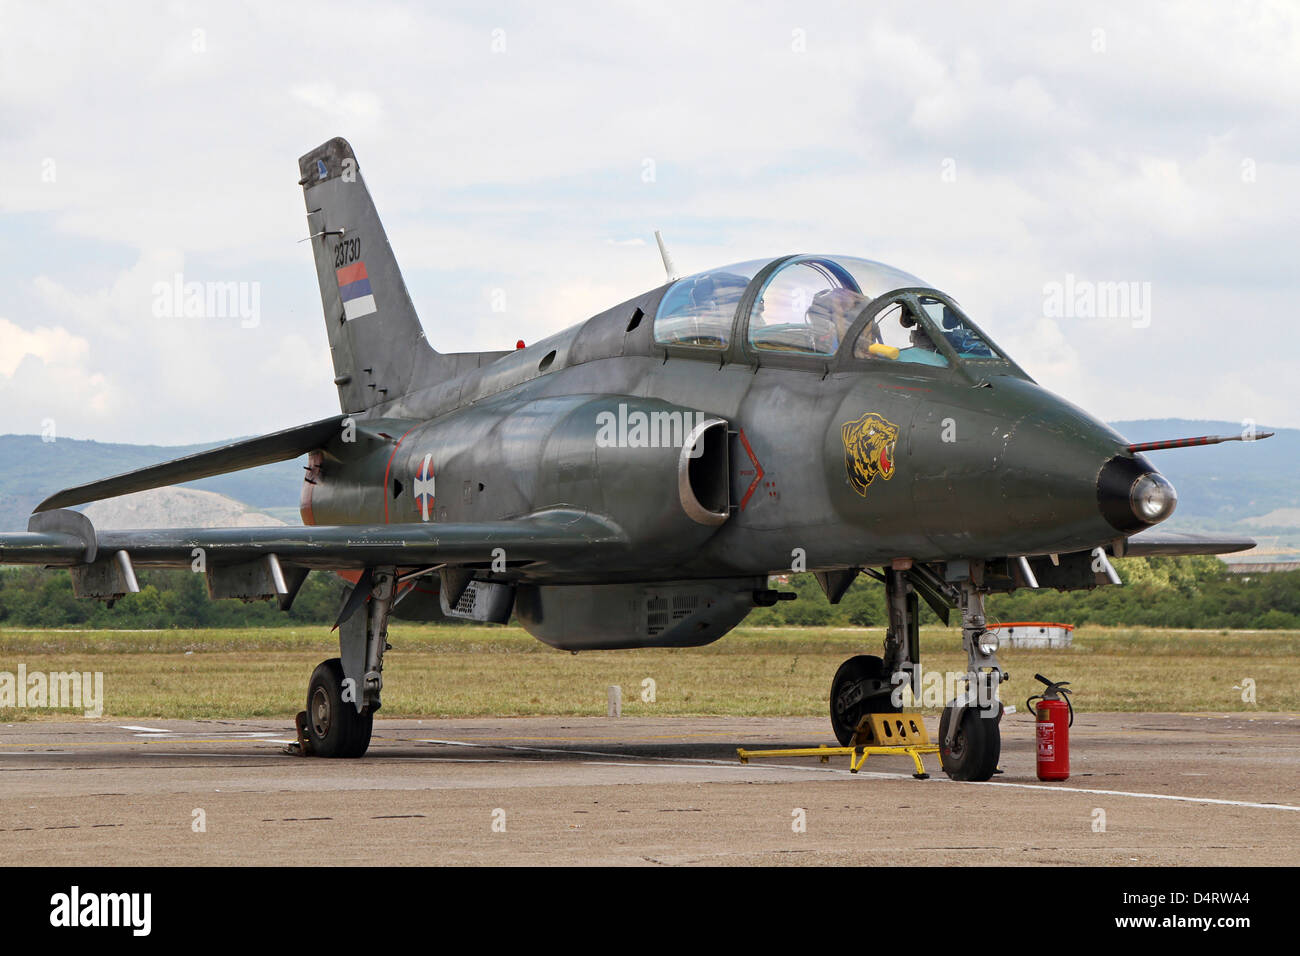 Serbian Air Force Soko G-4 Super Galeb parked on the runway in Serbia. Stock Photo